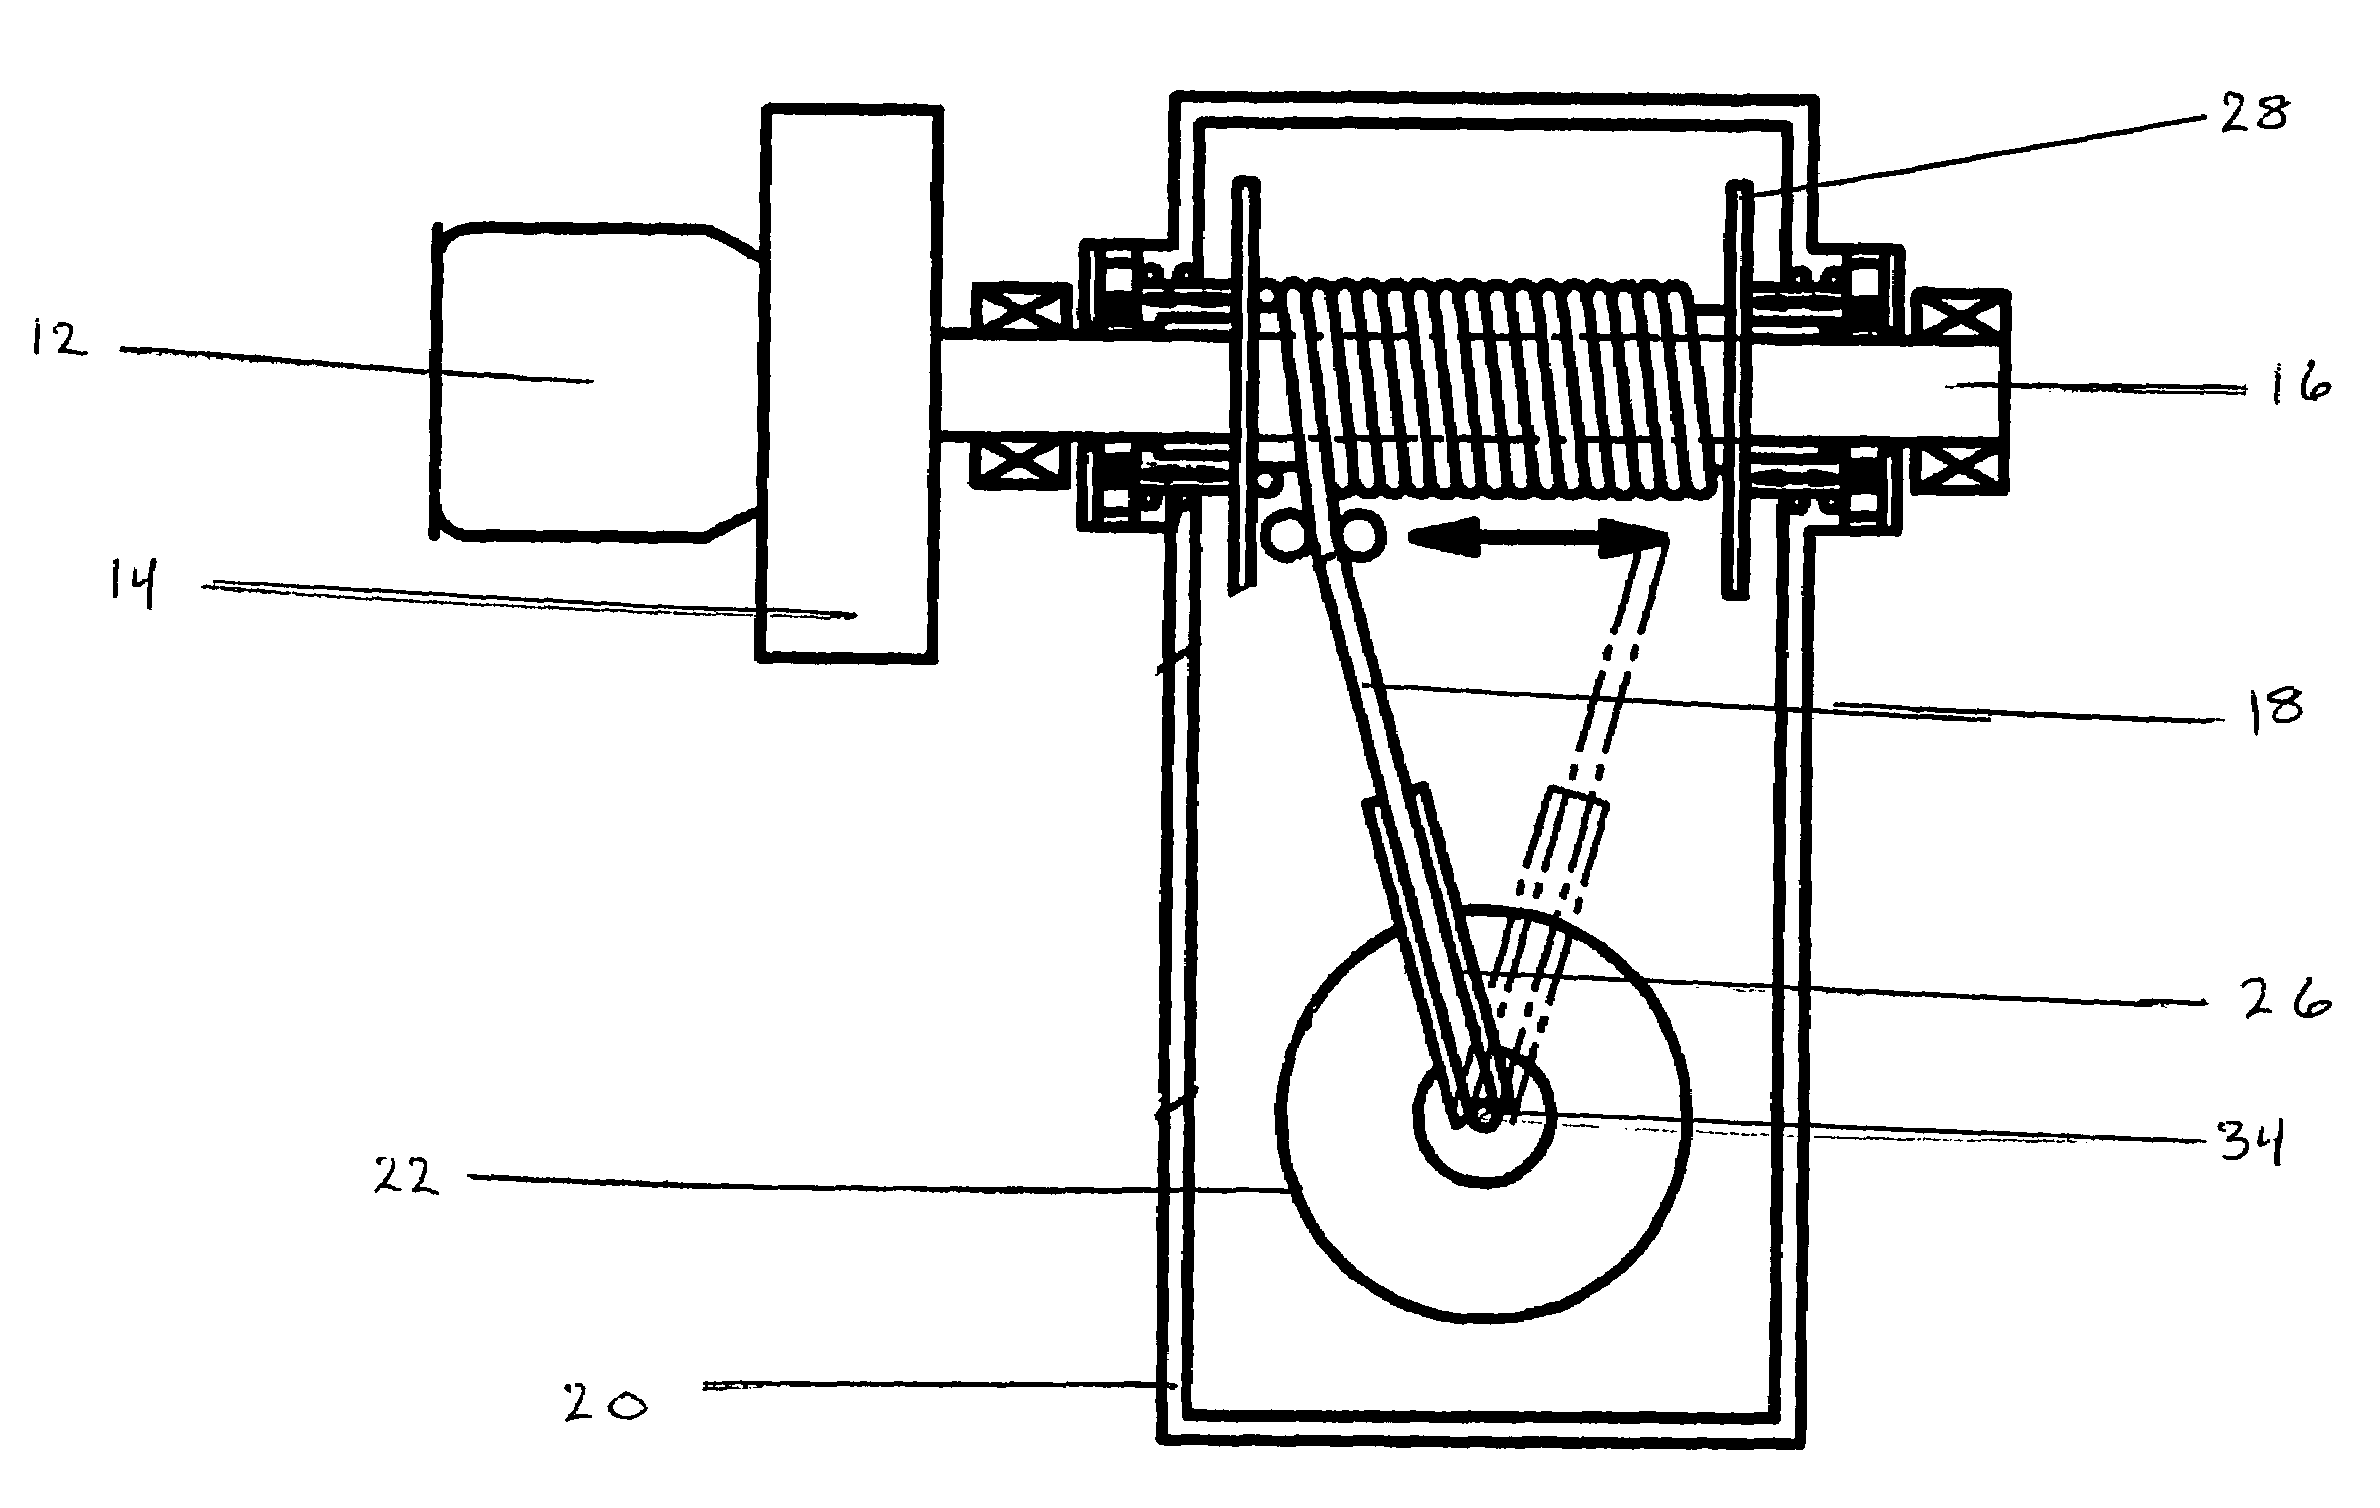 Variably operable oil recovery system